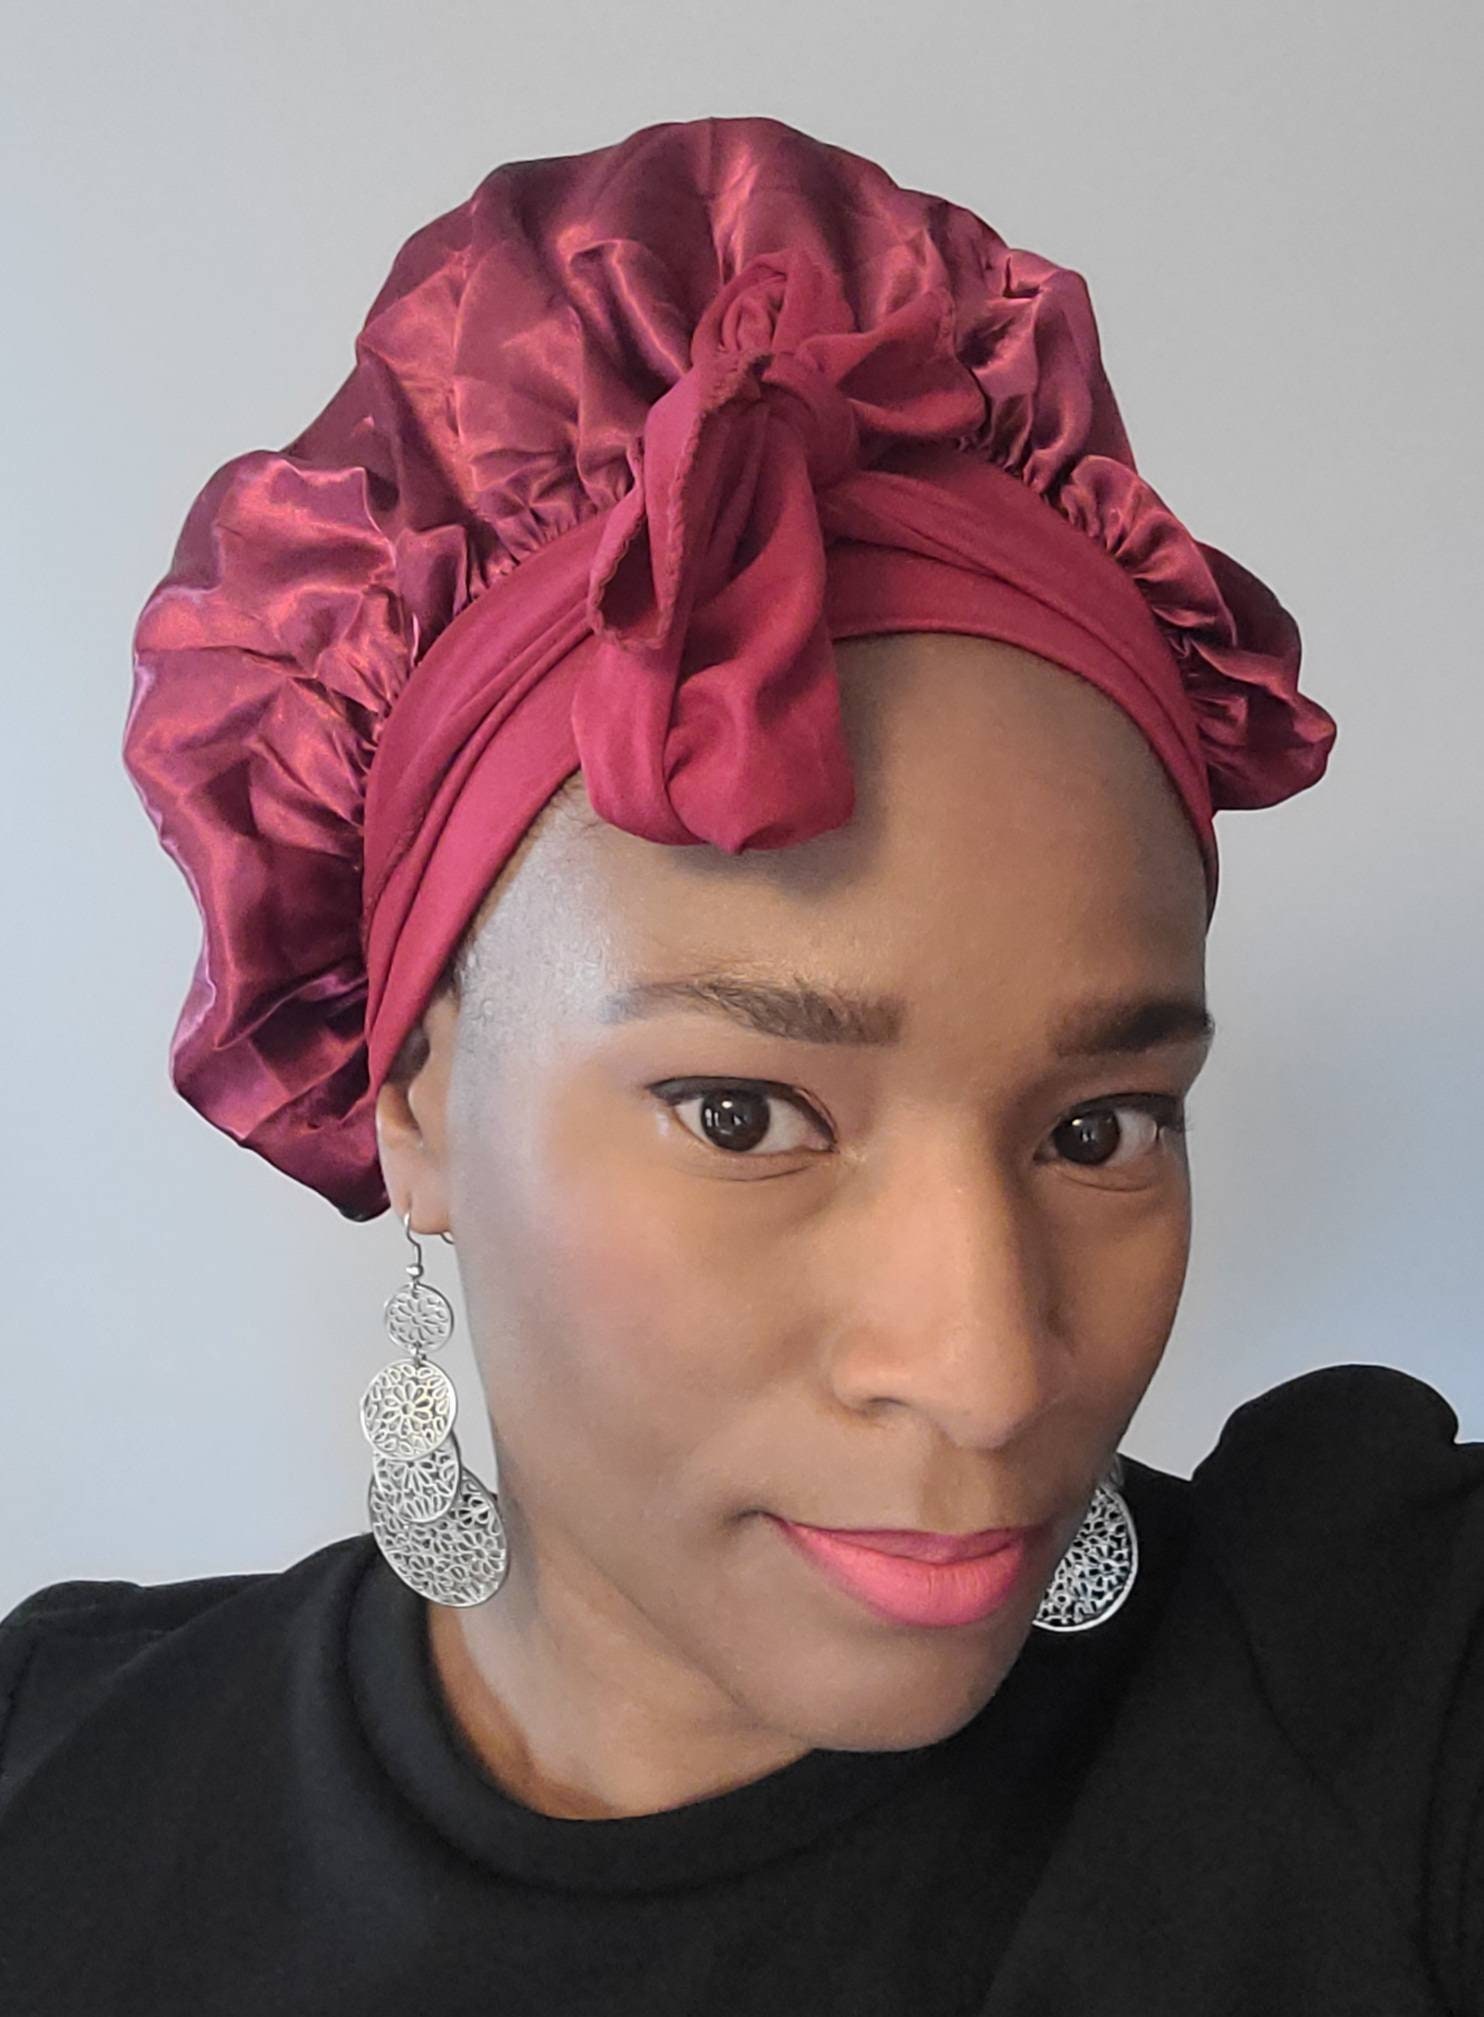 Edge Scarf for Women - Satin Head Wrap for Laying Edges - for Natural Hair  & Wigs - Soft, Stylish & Stays in Place Chains